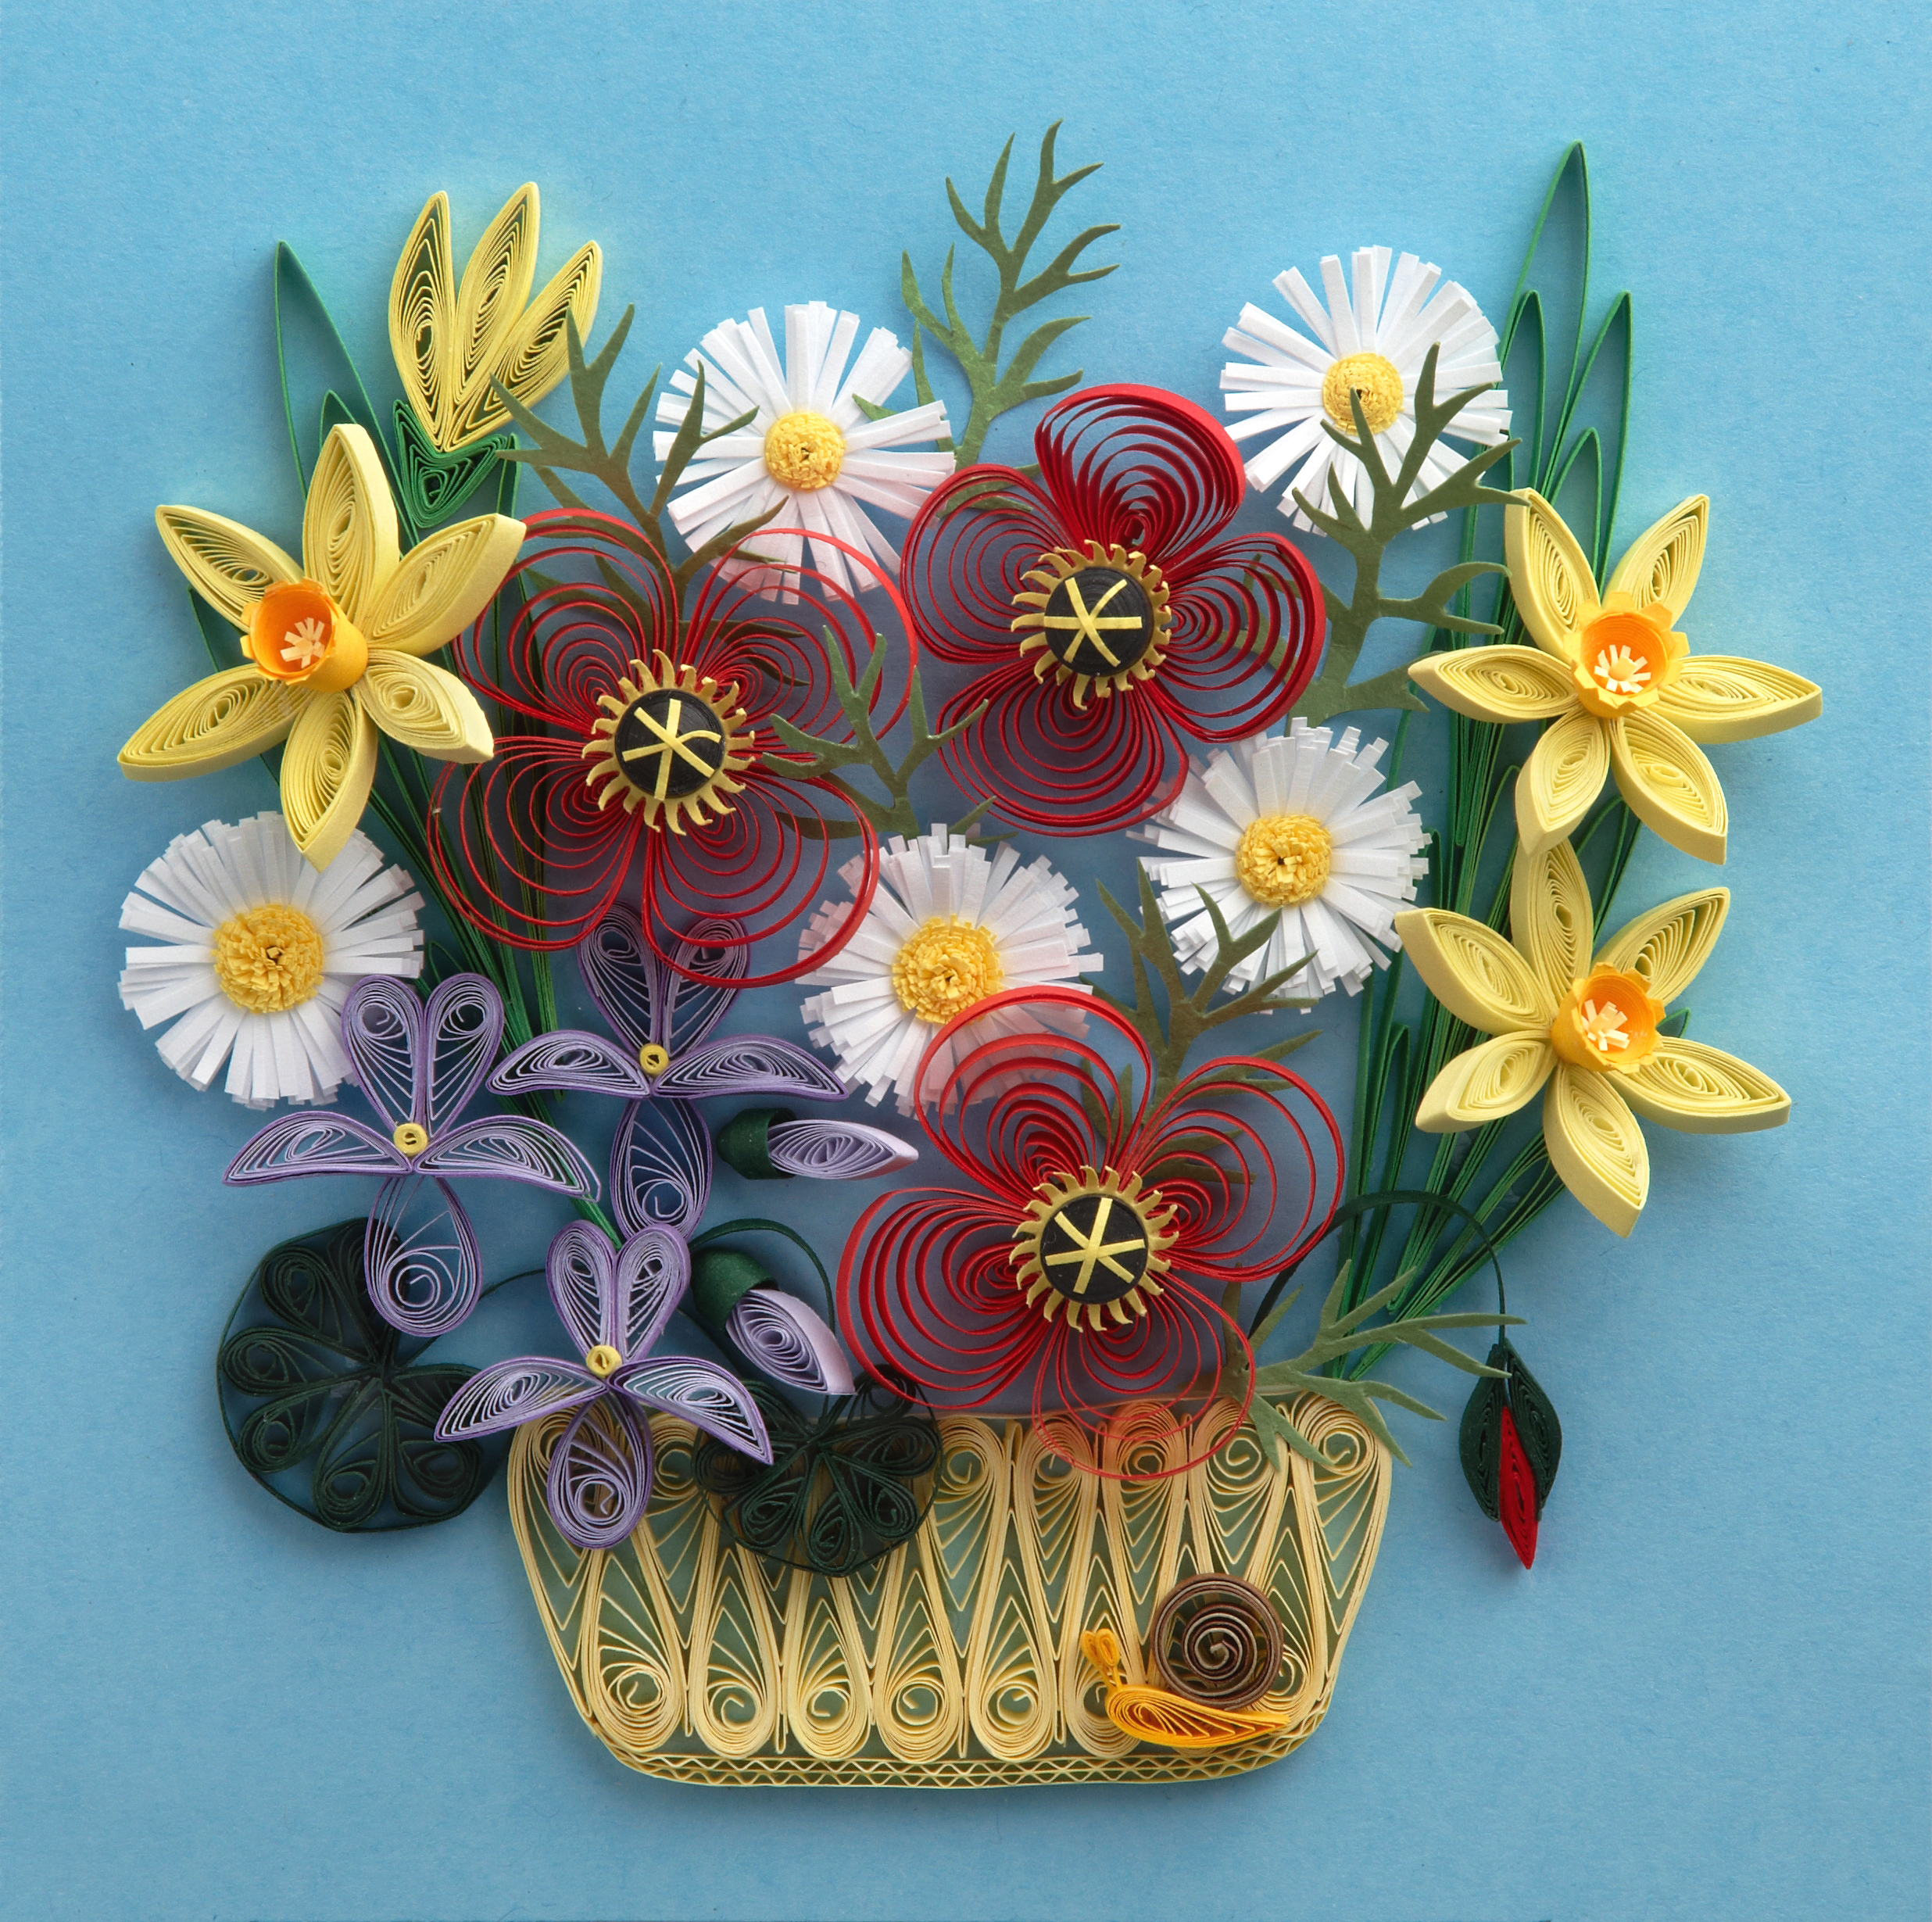 Quilling Art Meaning